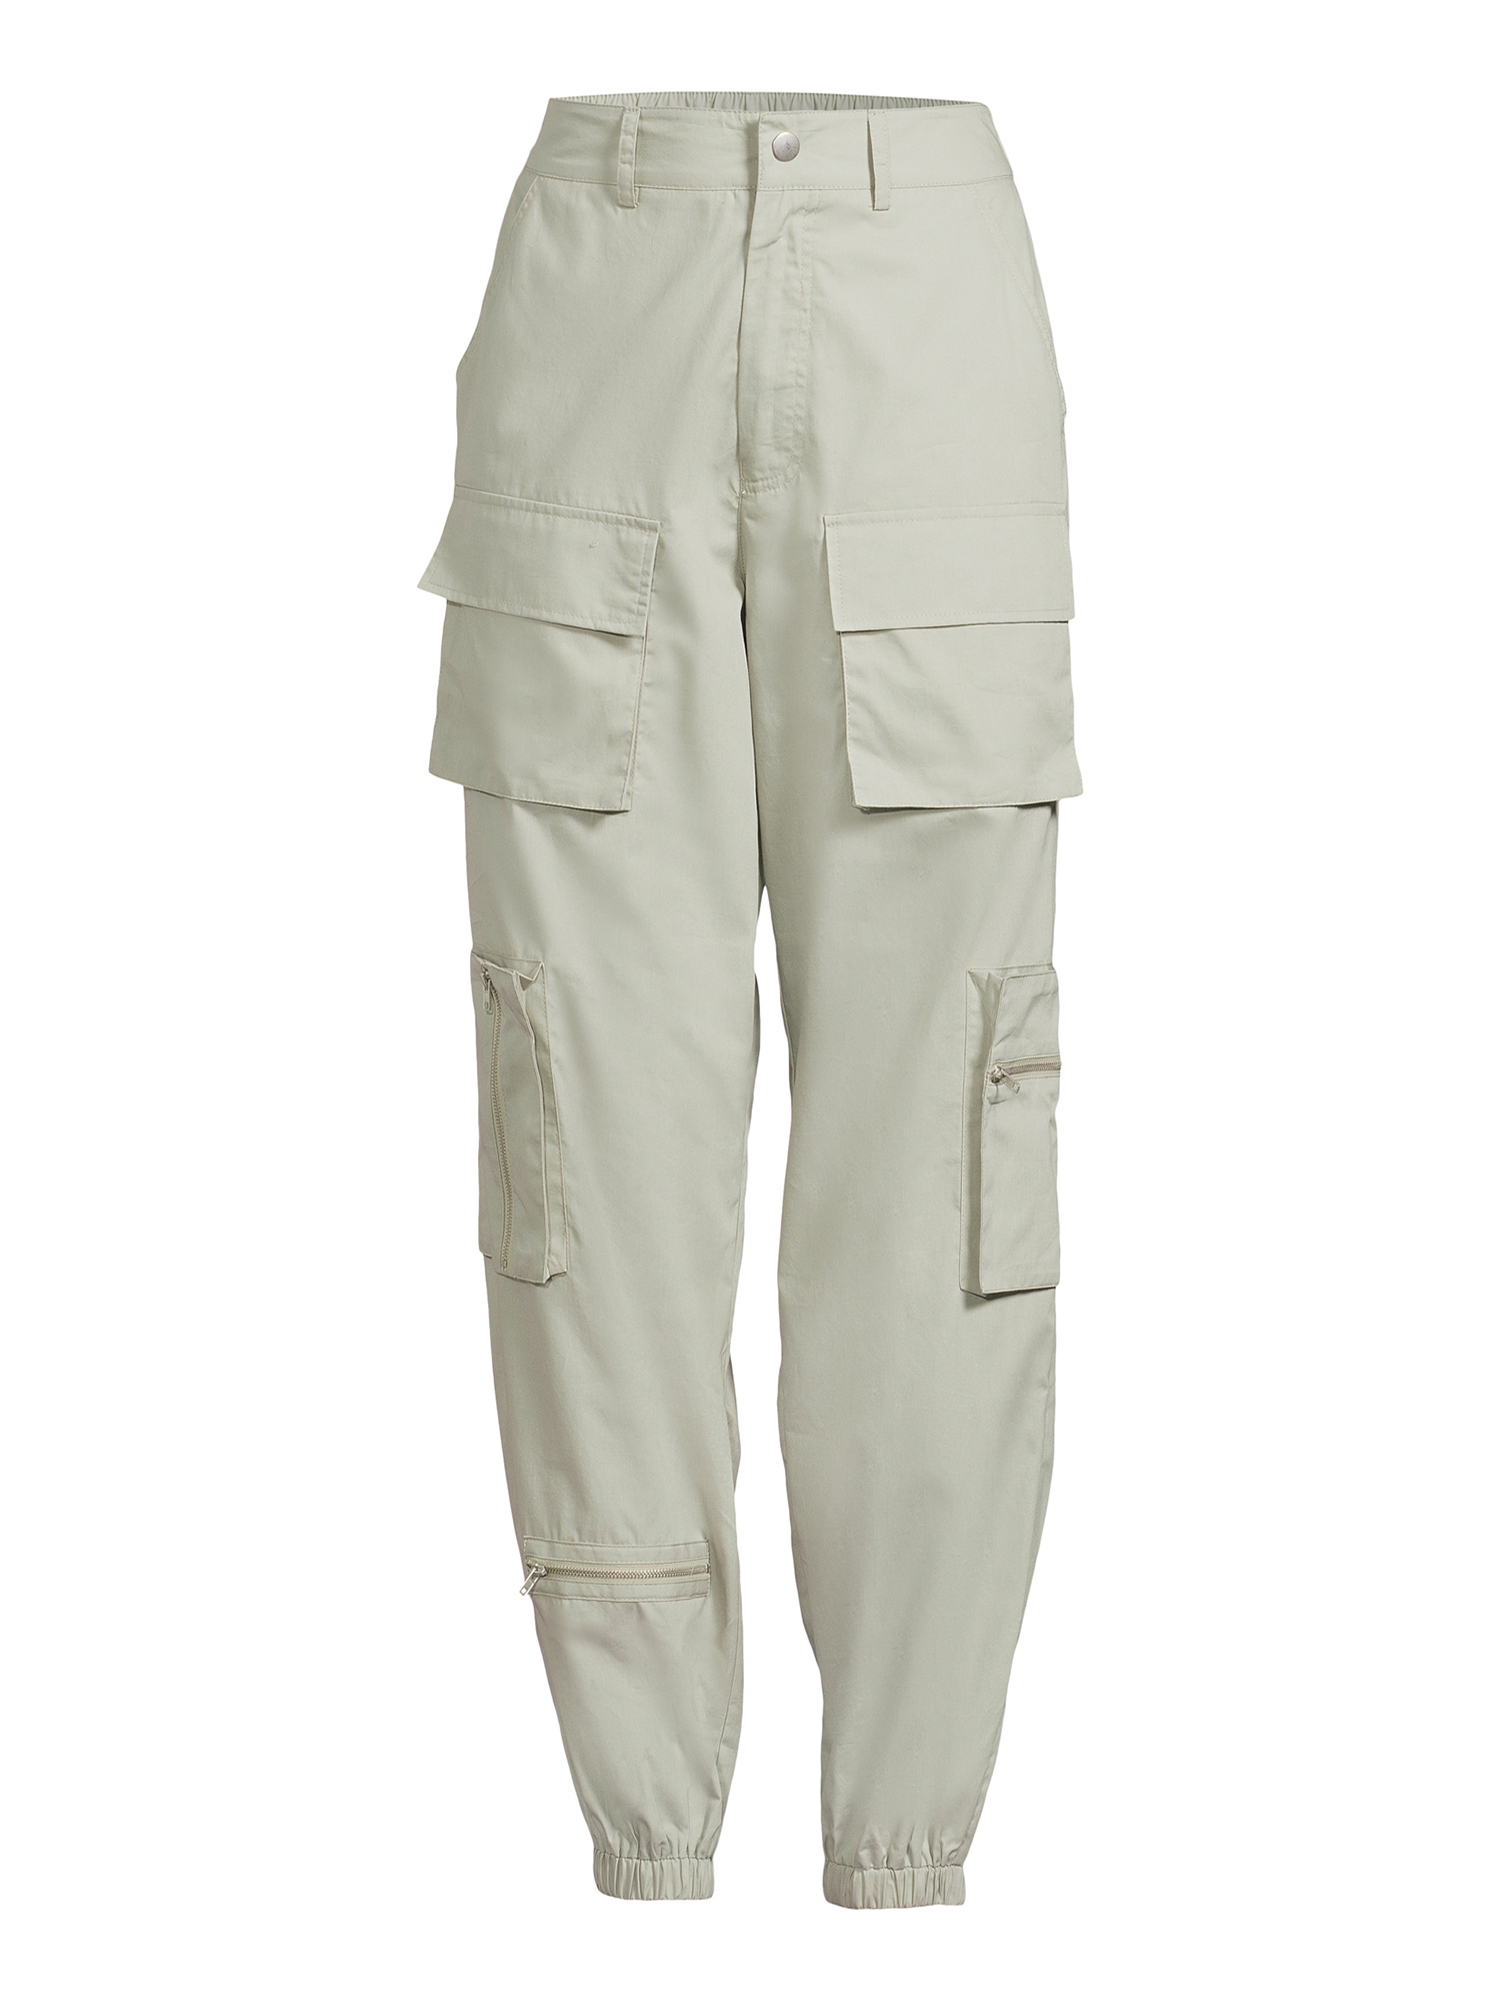 Liv & Lottie Juniors Cargo Pants with Zippers, Sizes S-XL - image 5 of 5